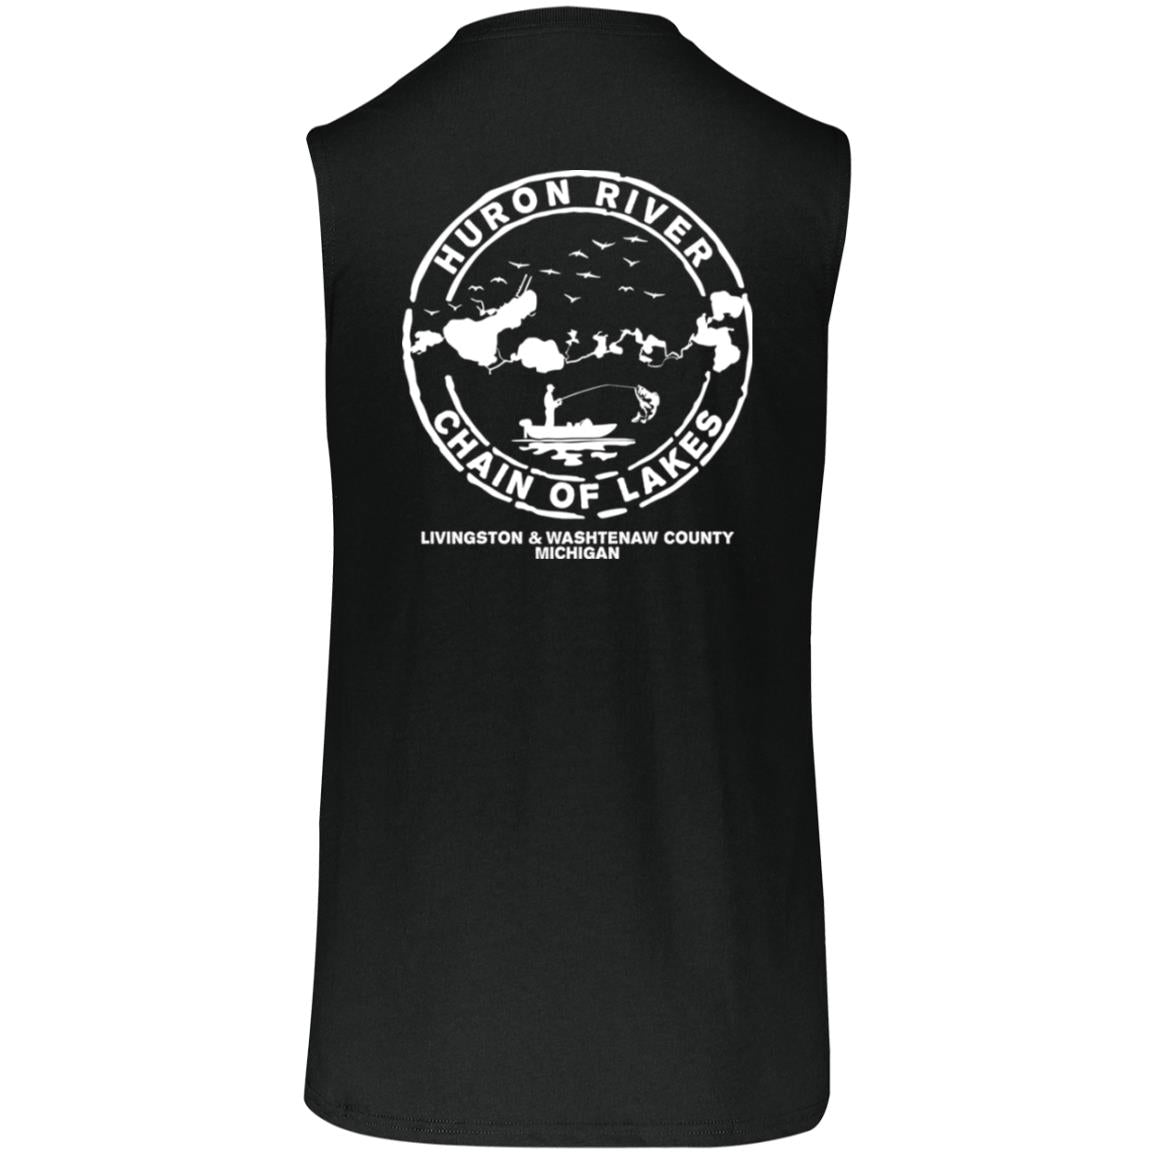 HRCL FL - Boats N Hoes - 2 Sided 64MTTM Essential Dri-Power Sleeveless Muscle Tee